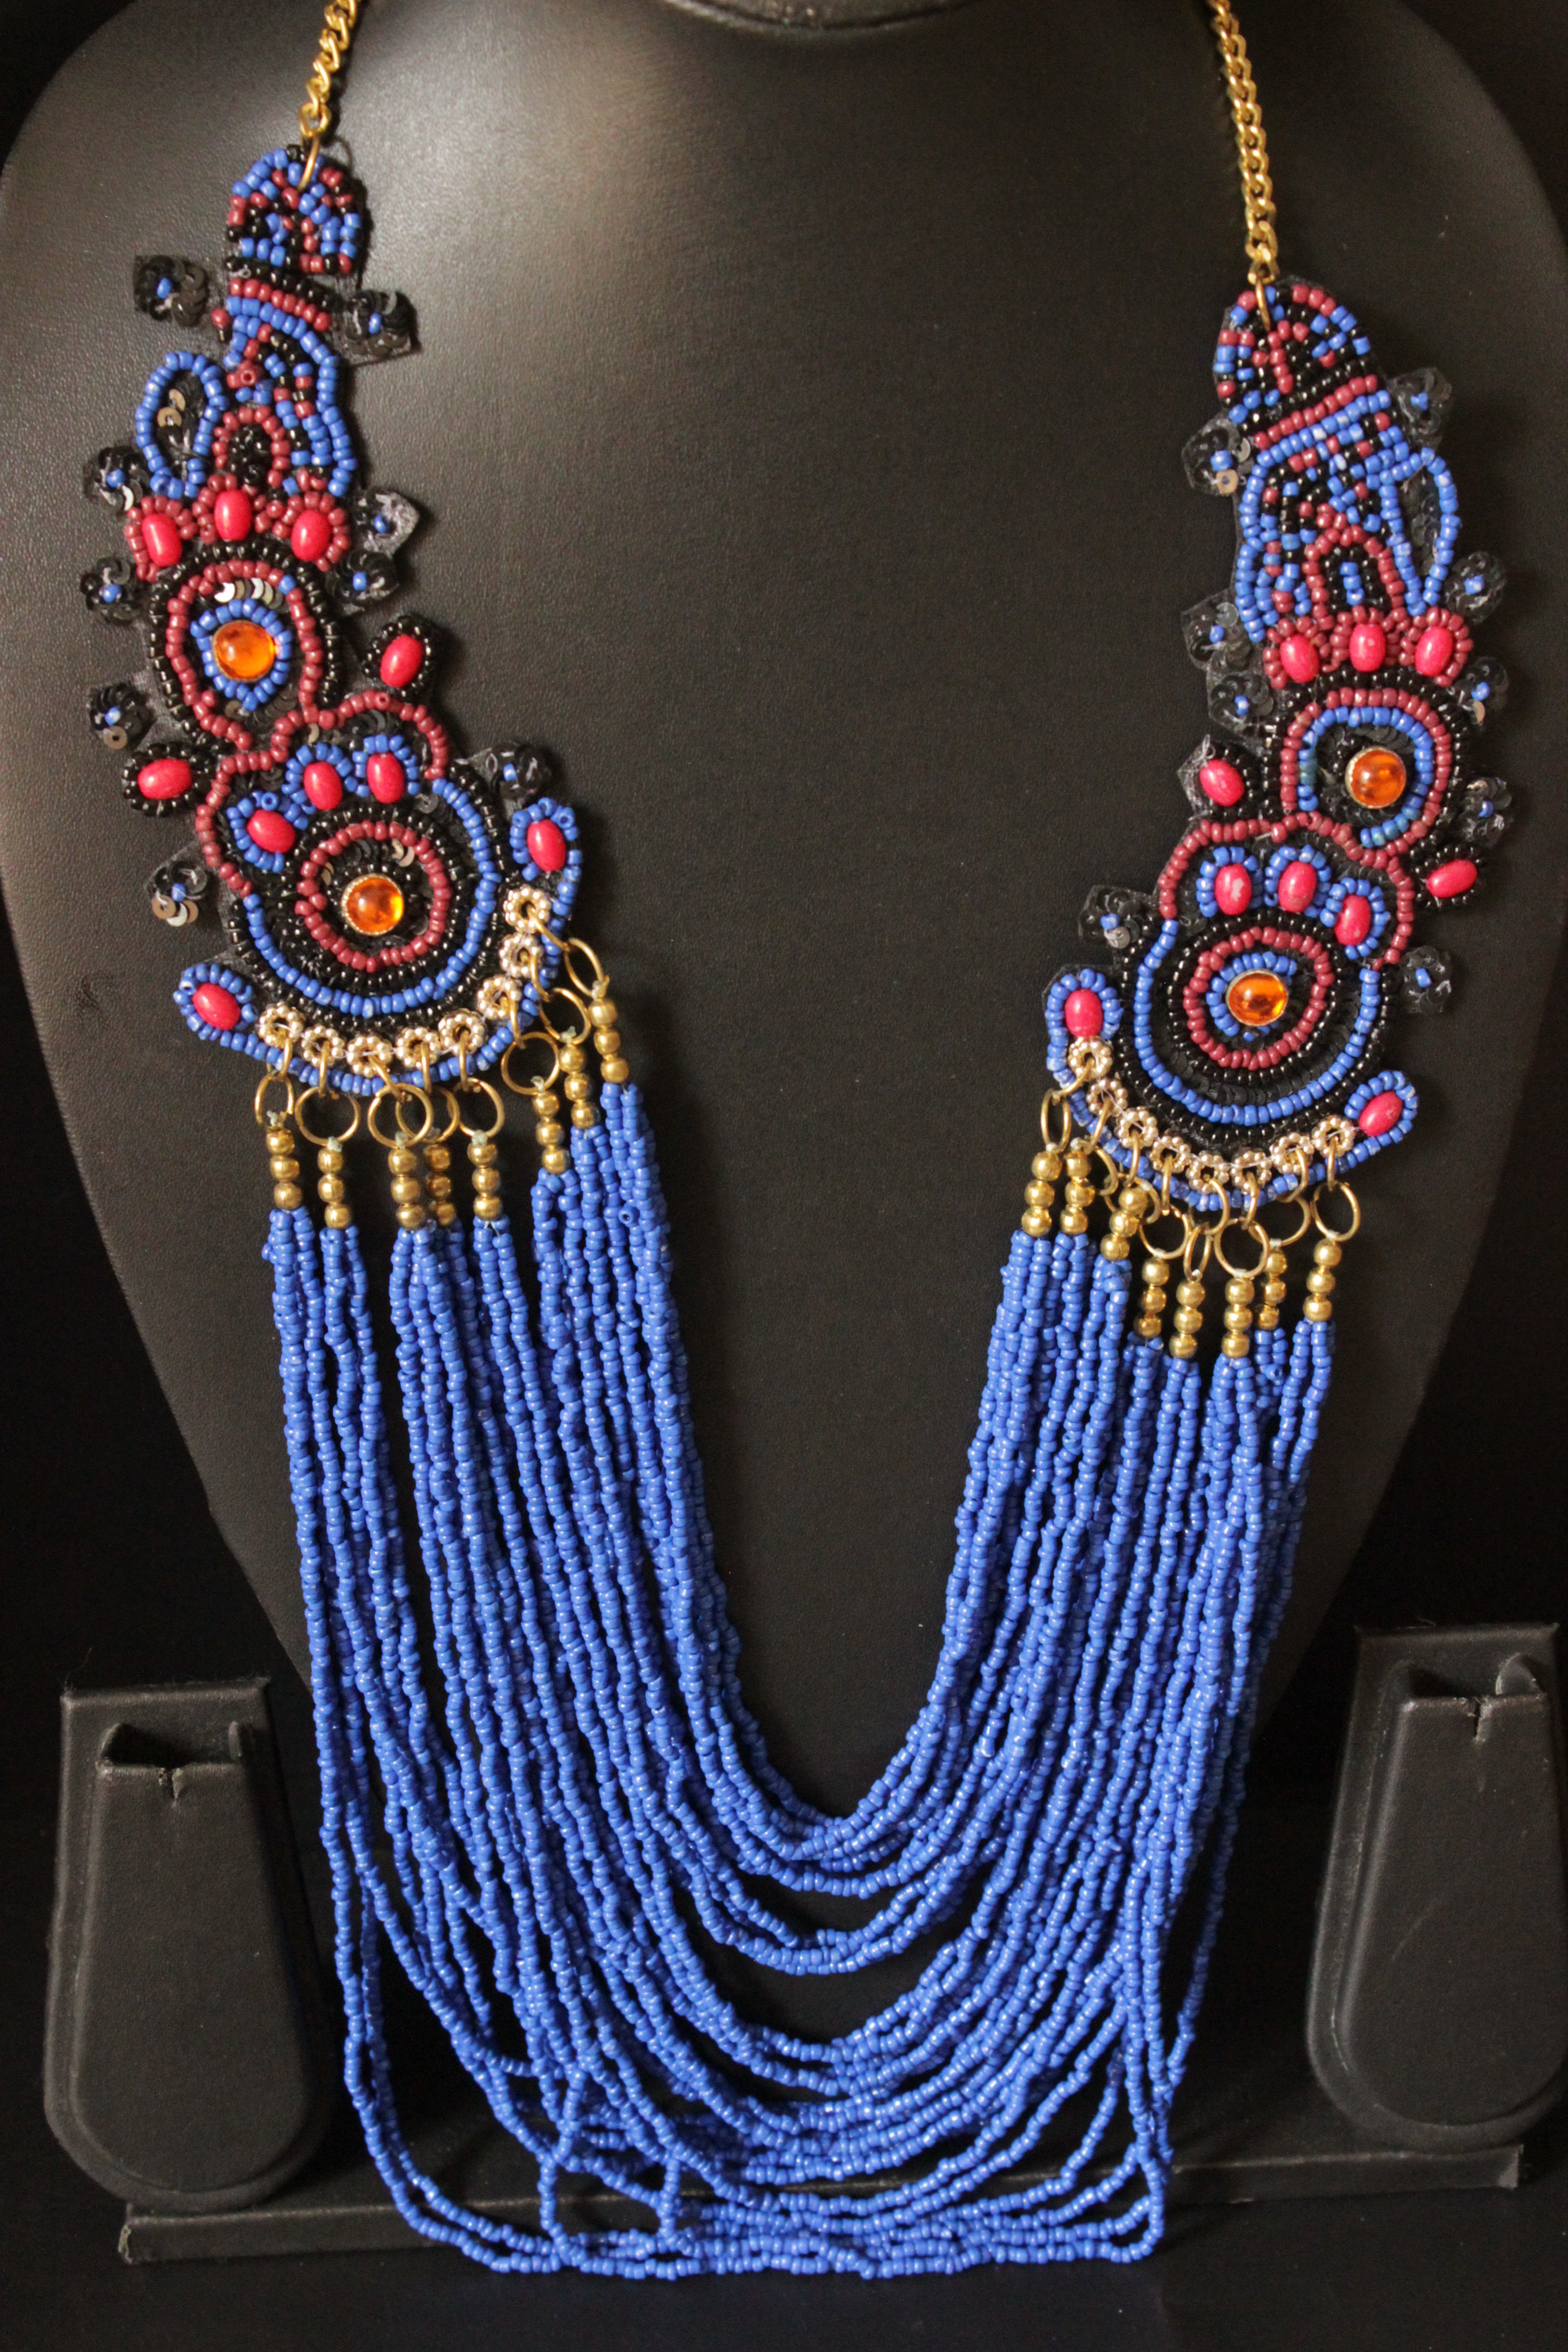 Royal Blue Multi-Layer Hand Beaded Collar Necklace